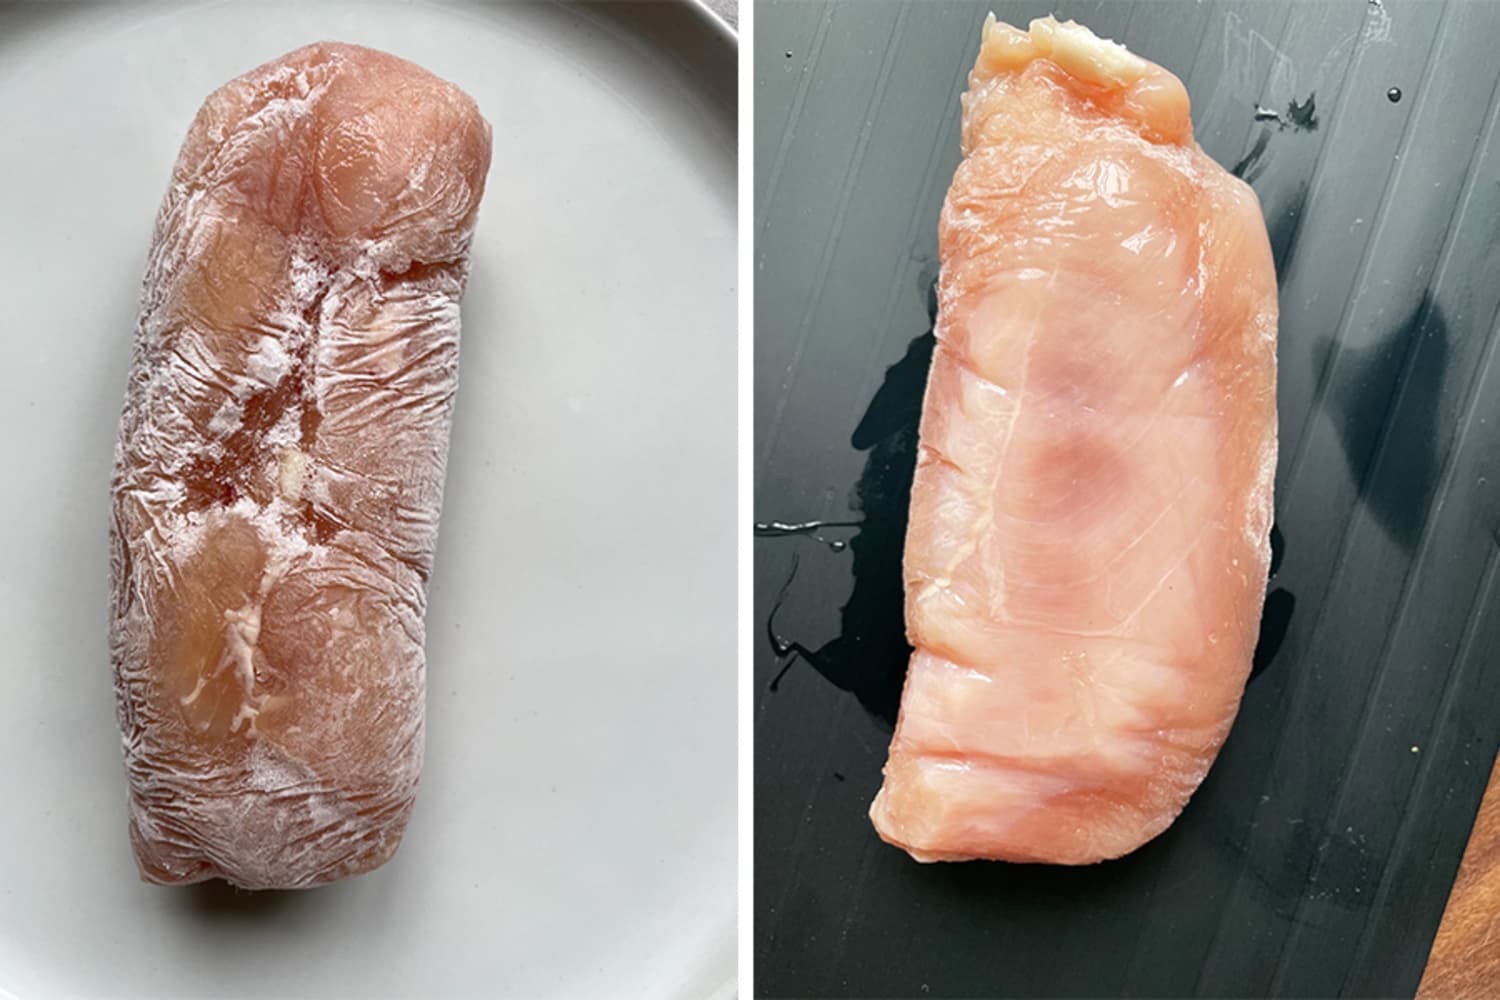 Does a Defrosting Tray Really Work Miracles on Frozen Meat?